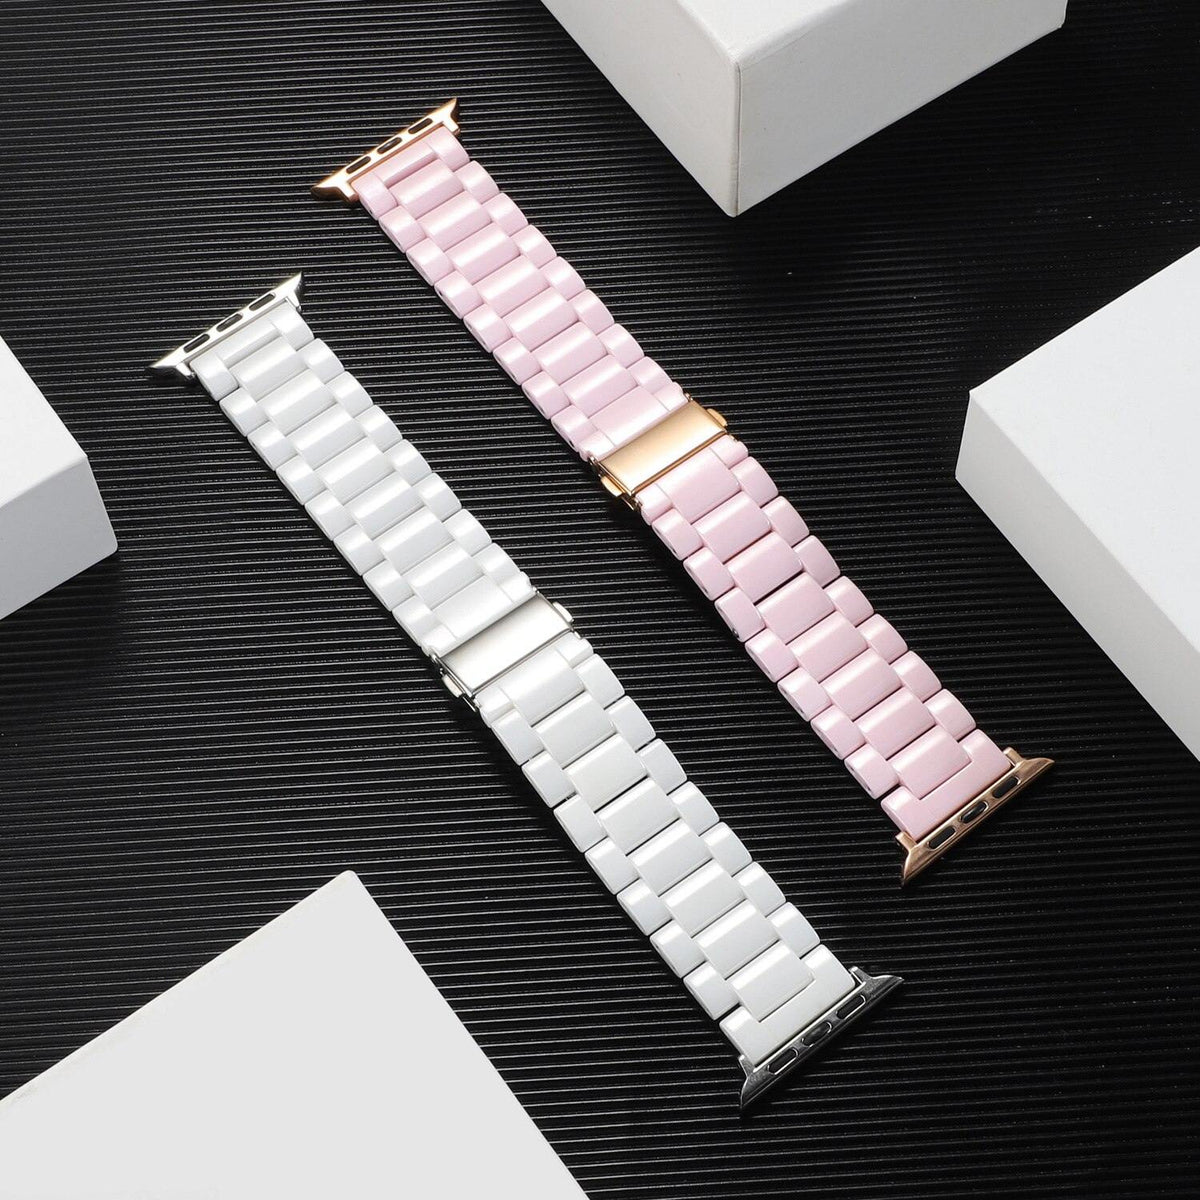 Ceramic Apple Watch BandBand Length: 20cmItem Type: WatchbandsBand Material Type: CeramicCondition: New without tags


[focus_keyword]Apple Watch Band